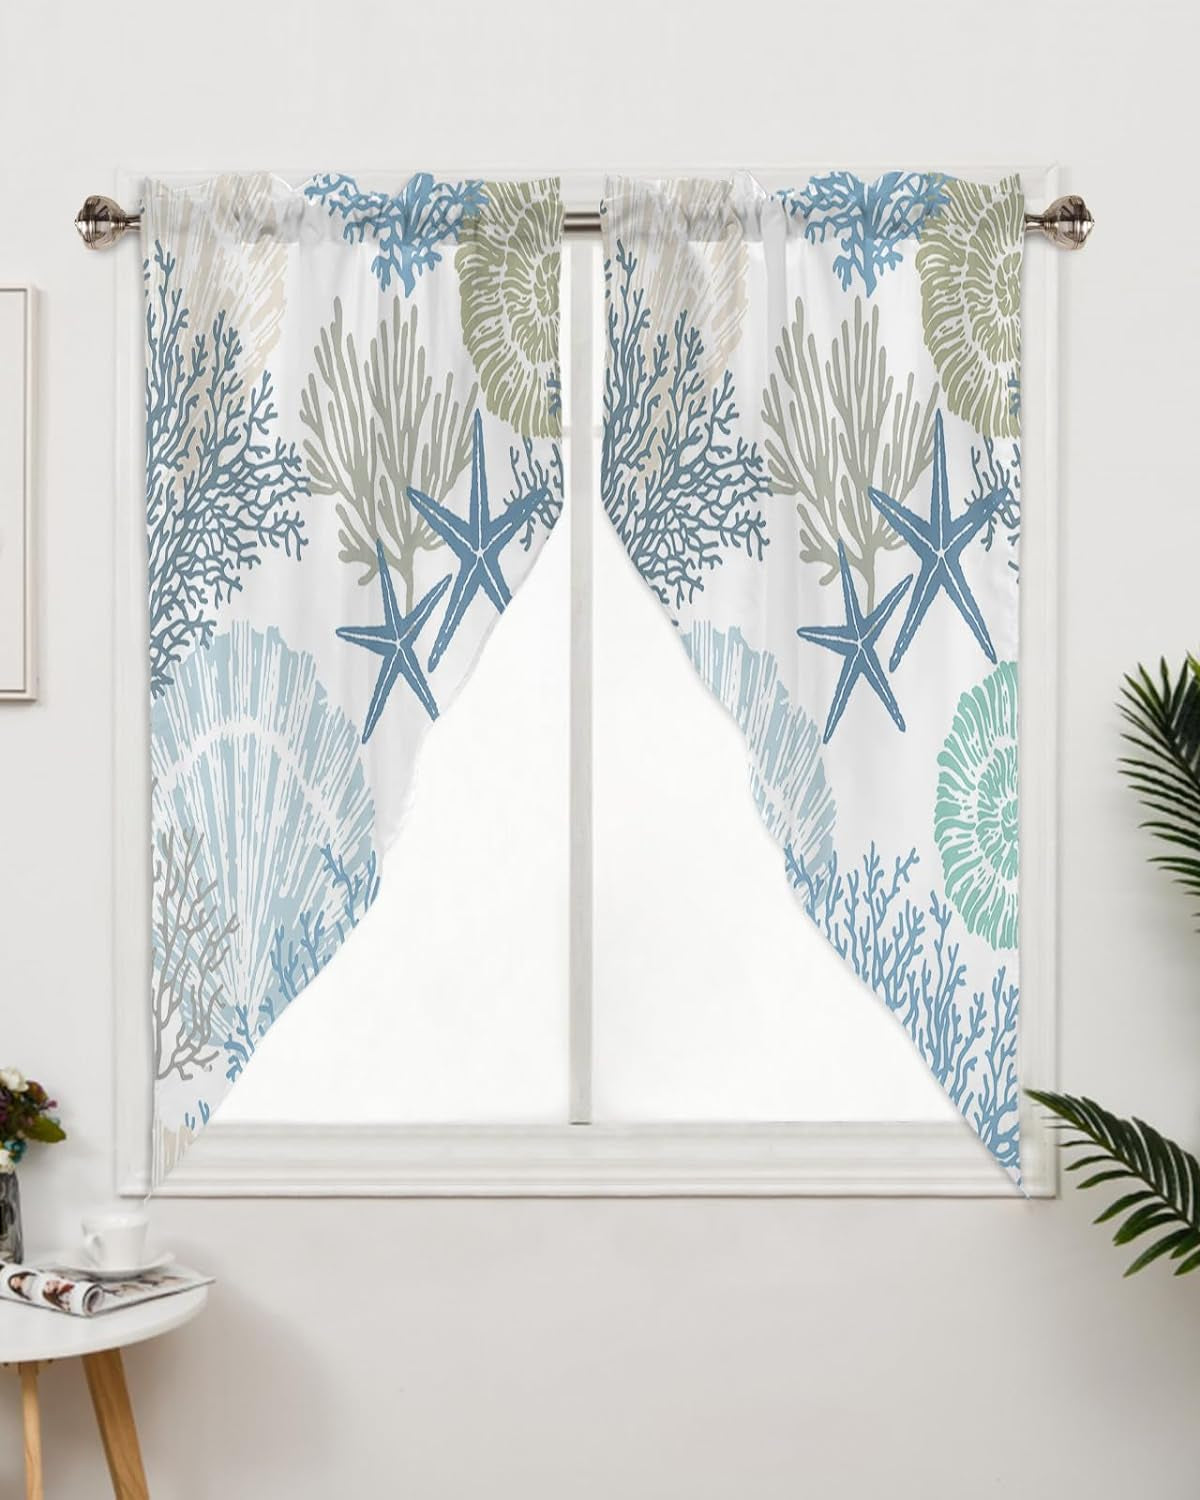 Swag Curtain,Ocean Theme Coral Shell Starfish Kitchen Valances Rod Pocket Curtains Tier Pair Swag Topper,Teal Blue Marine Sealife 2 Panels Window Treatment for Bathroom Living Room Bedroom